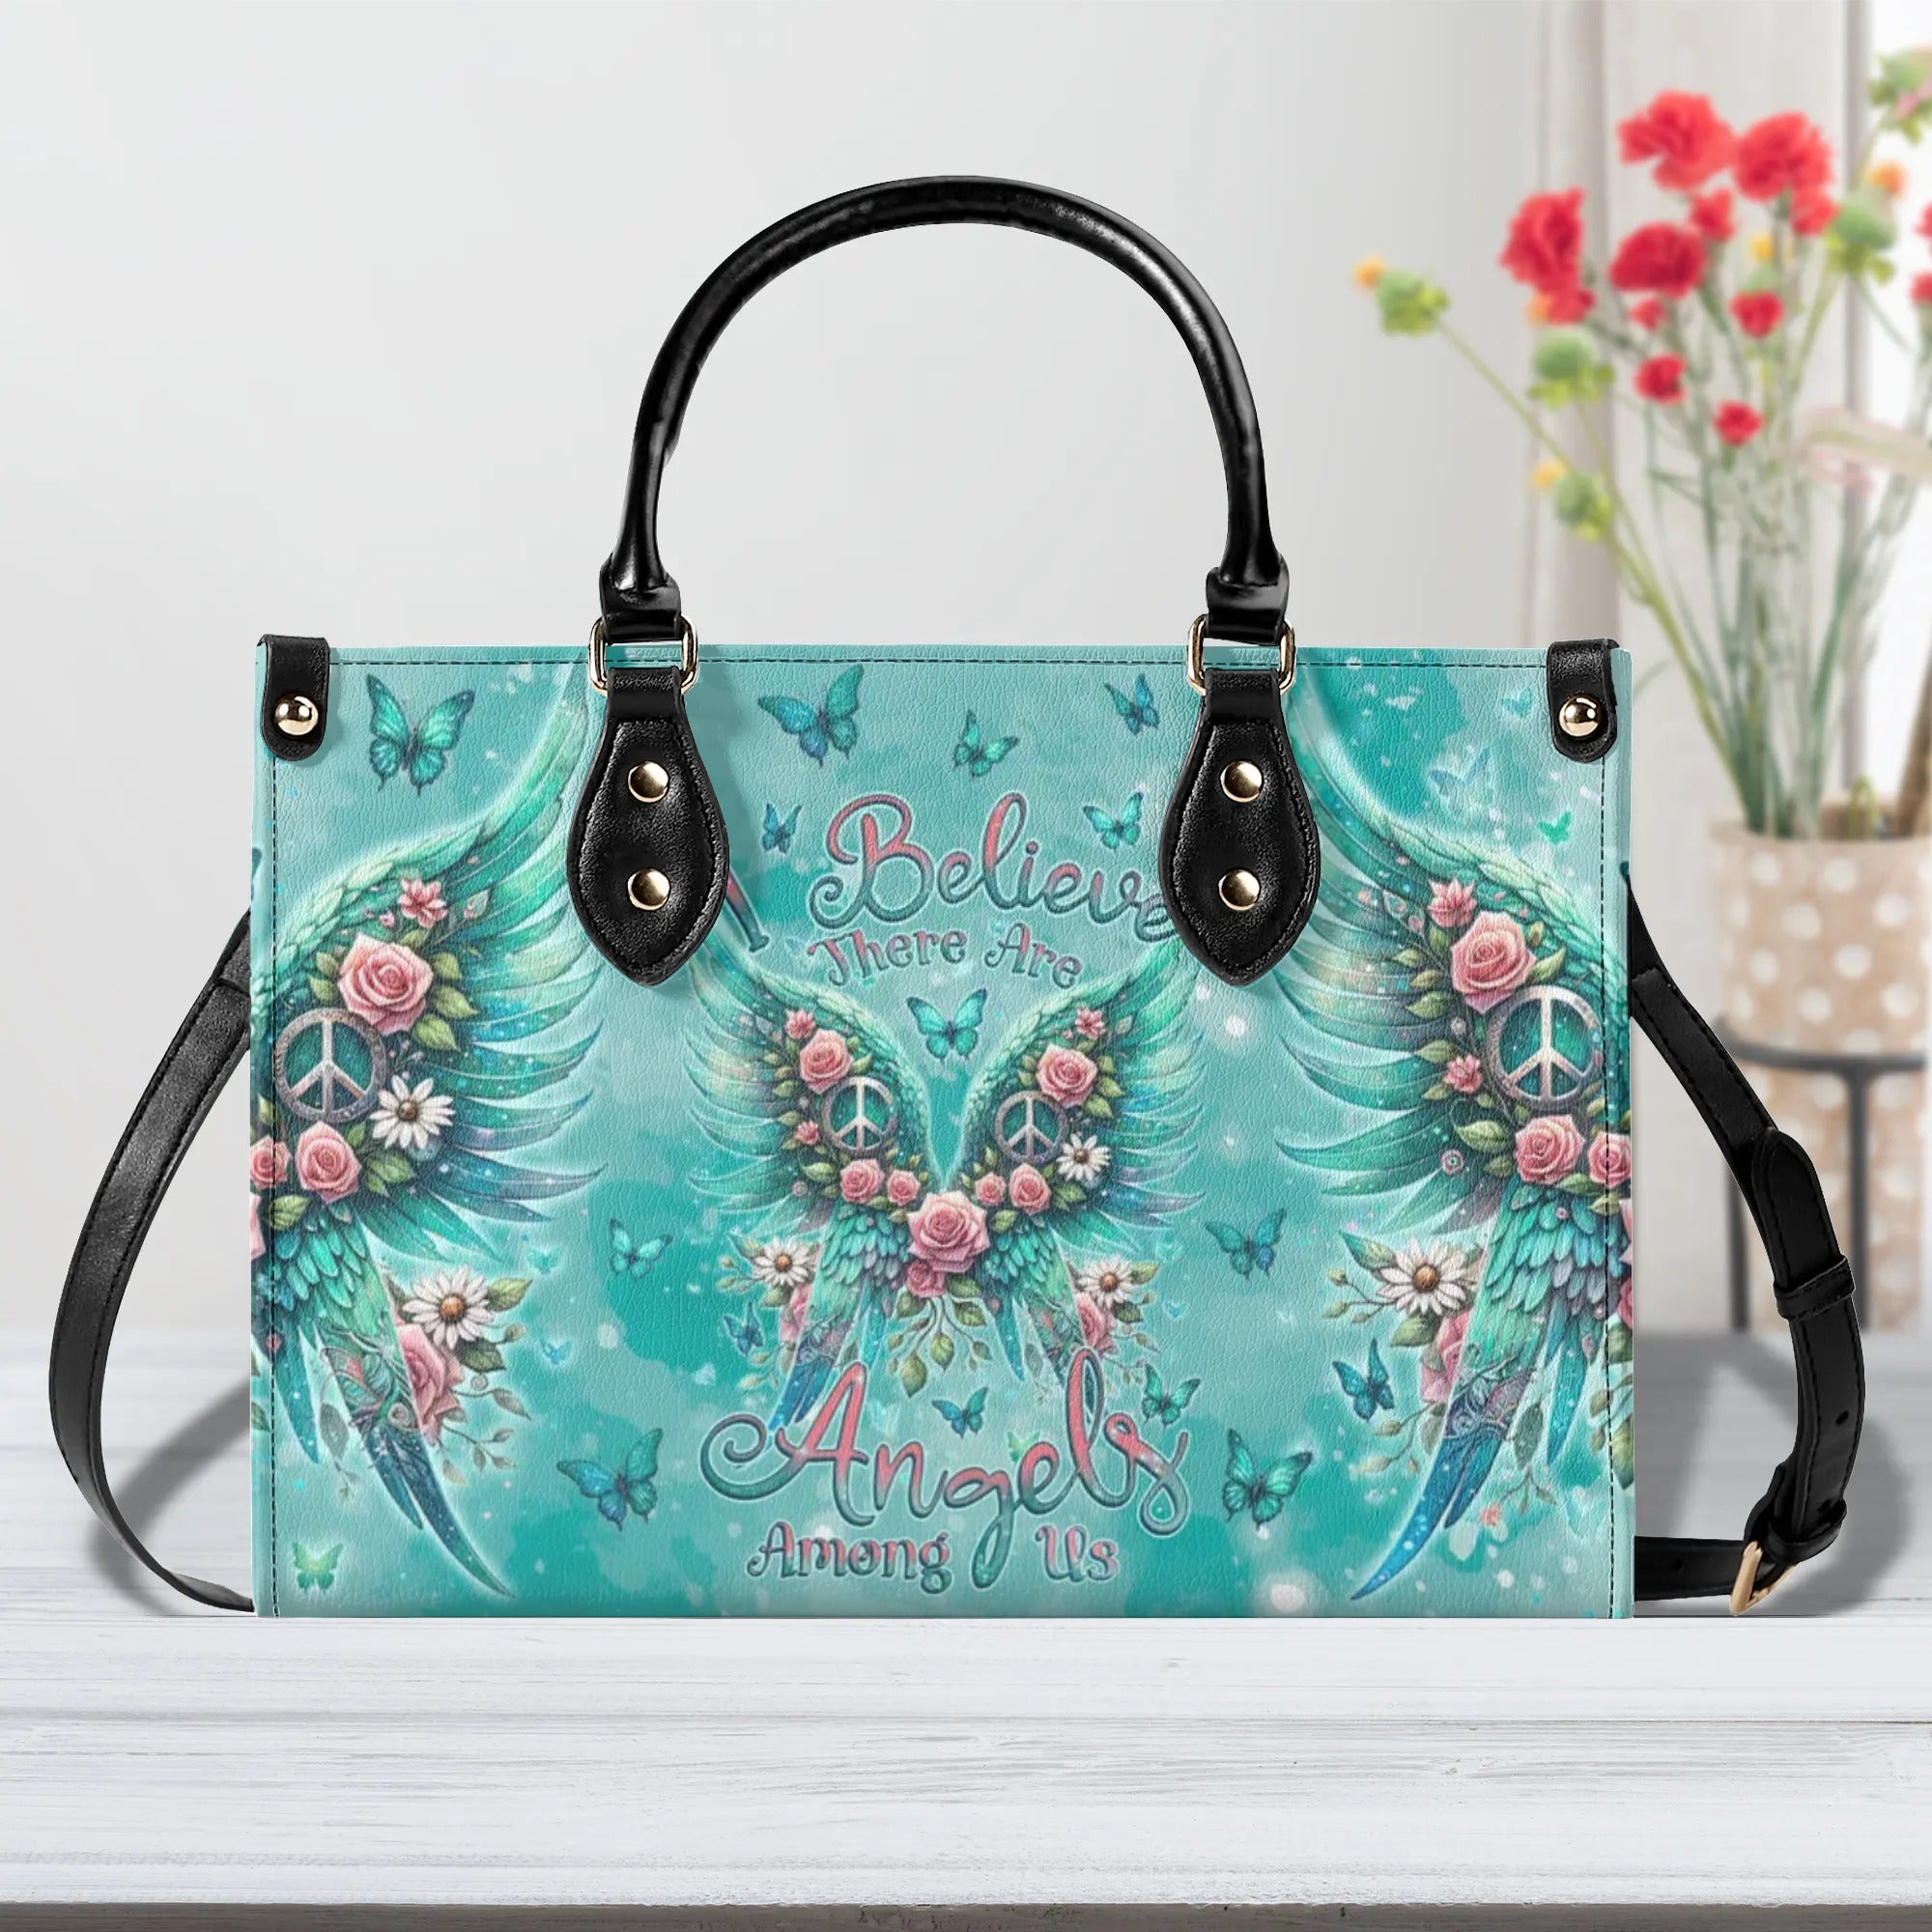 I BELIEVE THERE ARE ANGELS AMONG US LEATHER HANDBAG - TLNZ0706244